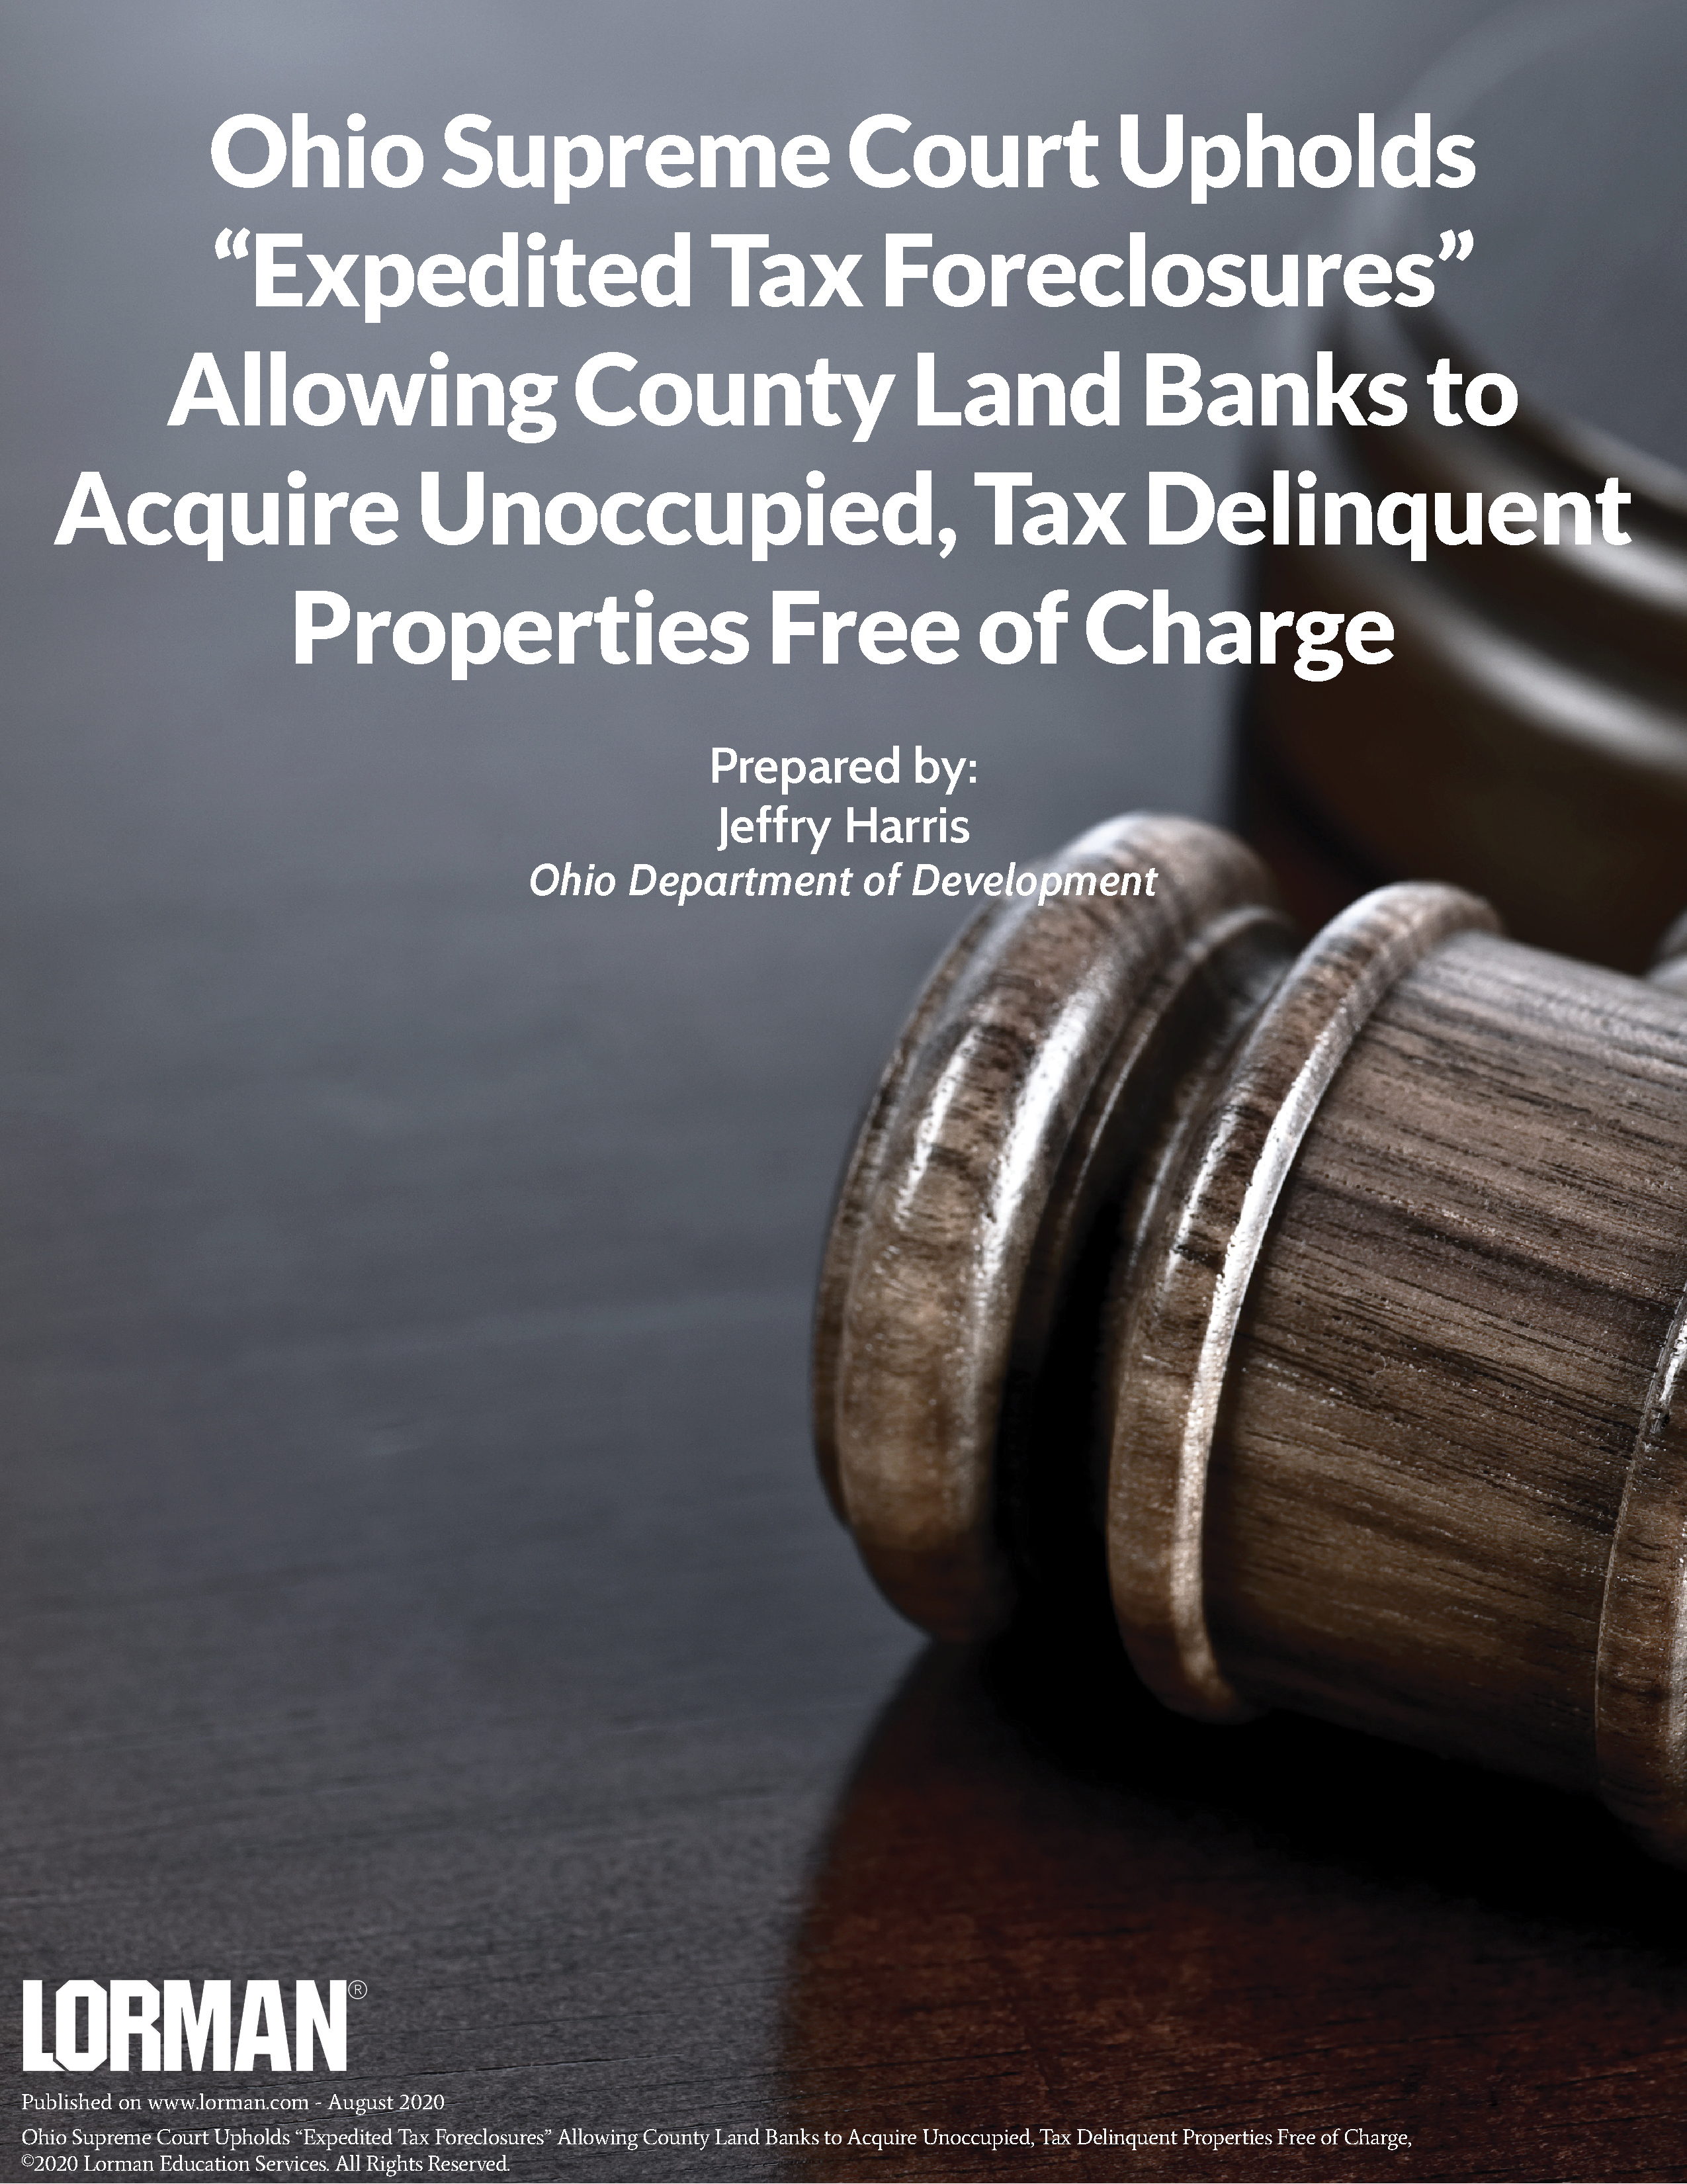 Ohio Supreme Court Upholds Expedited Tax Foreclosures - County Land Banks to Acquire Properties